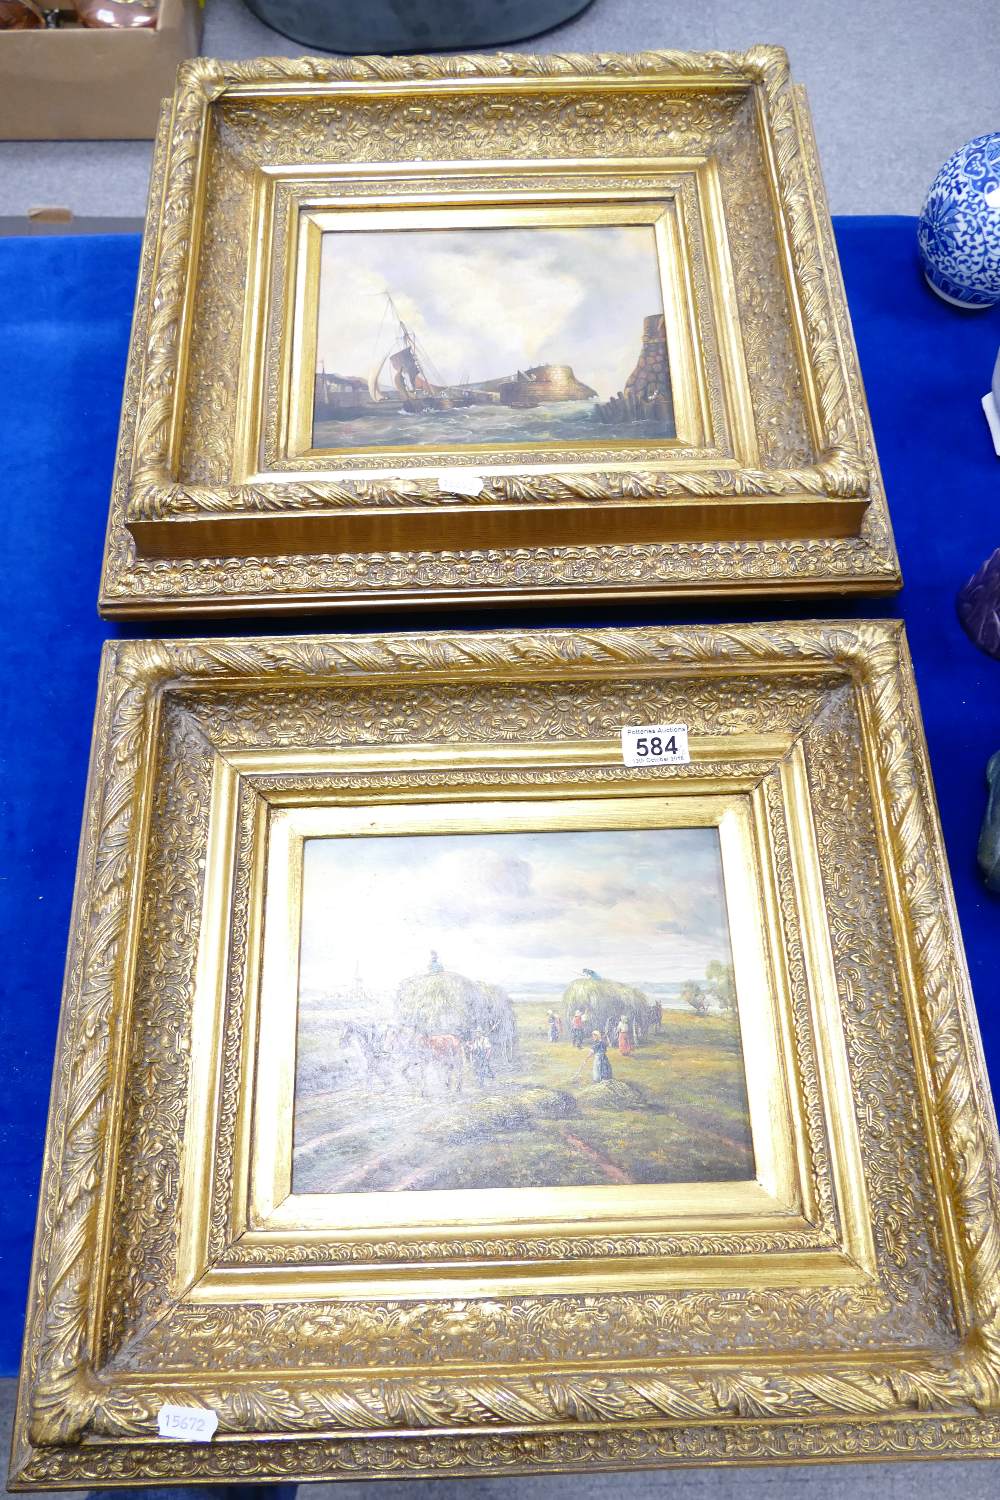 Heavy Gilt gramed 20th century painting with landscape imagery(2) - Image 2 of 2